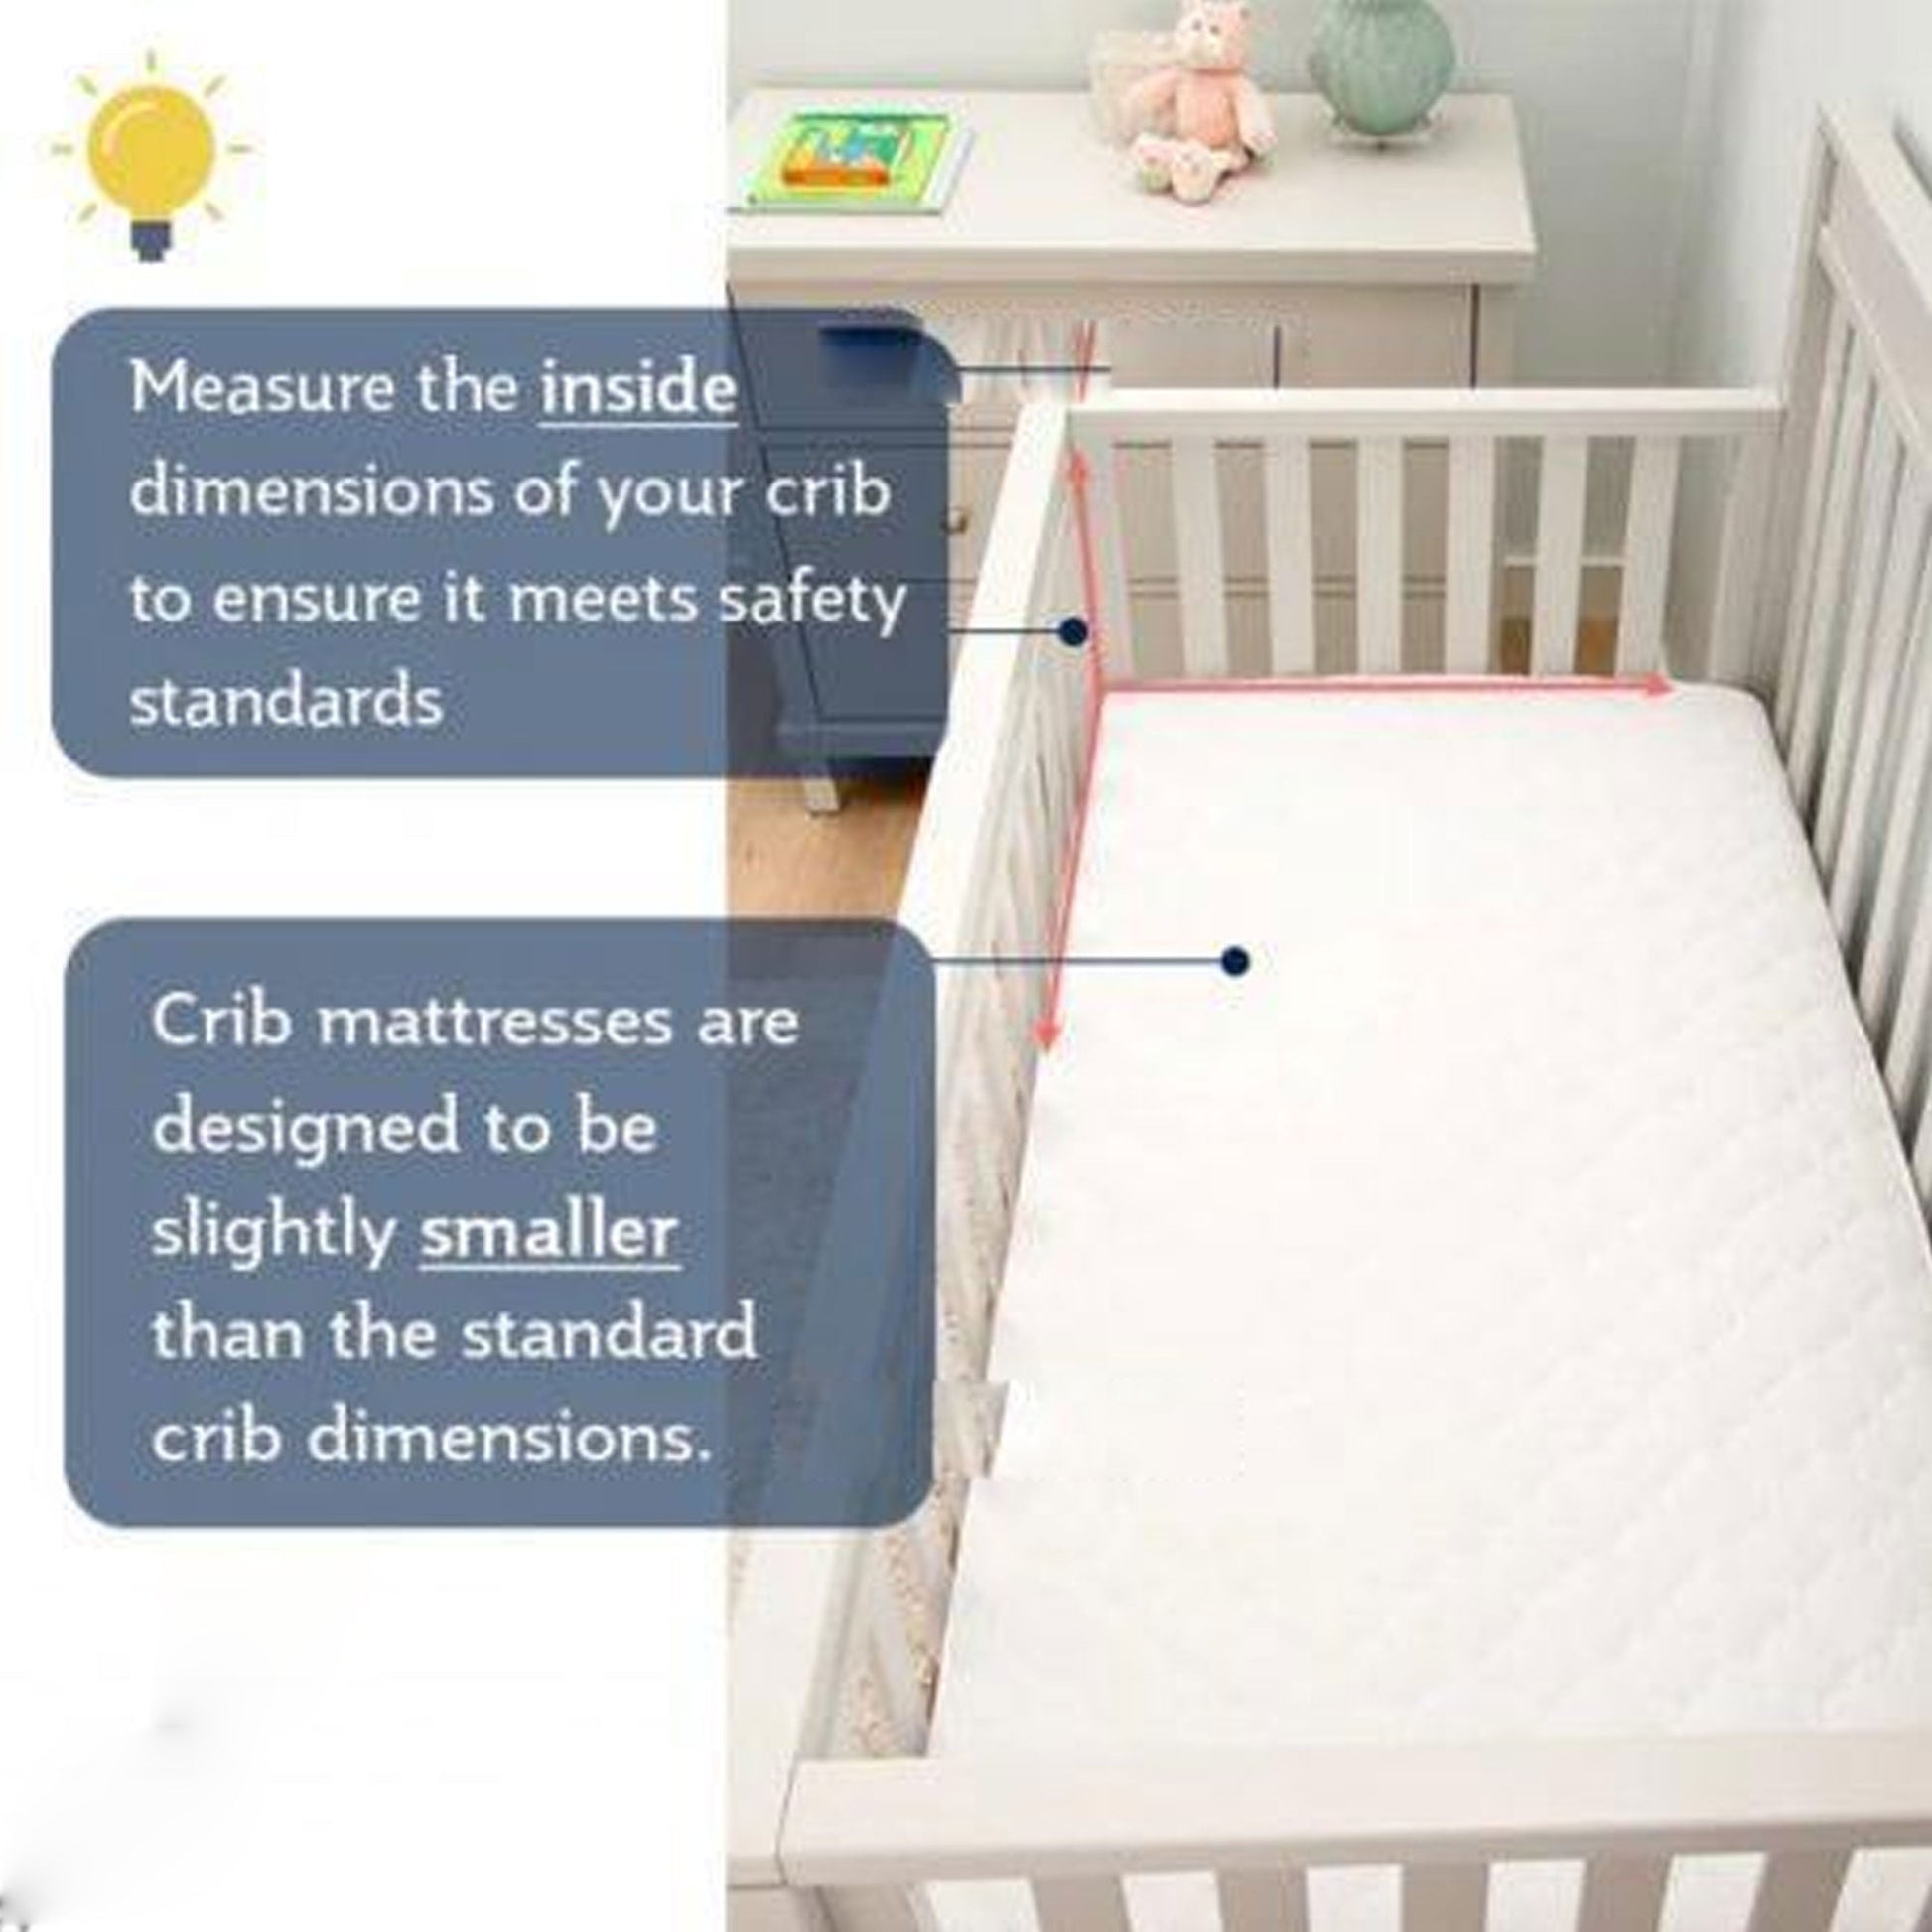 80 X 40 X 4 CM - CRIB Breathable Quilted Cot Baby Mattress - TheComfortshop.co.ukNursery Bedding0721718957102thecomfortshopTheComfortshop.co.ukCrib 80 x 4080 X 40 X 4 CM - CRIB Breathable Quilted Cot Baby Mattress - TheComfortshop.co.uk